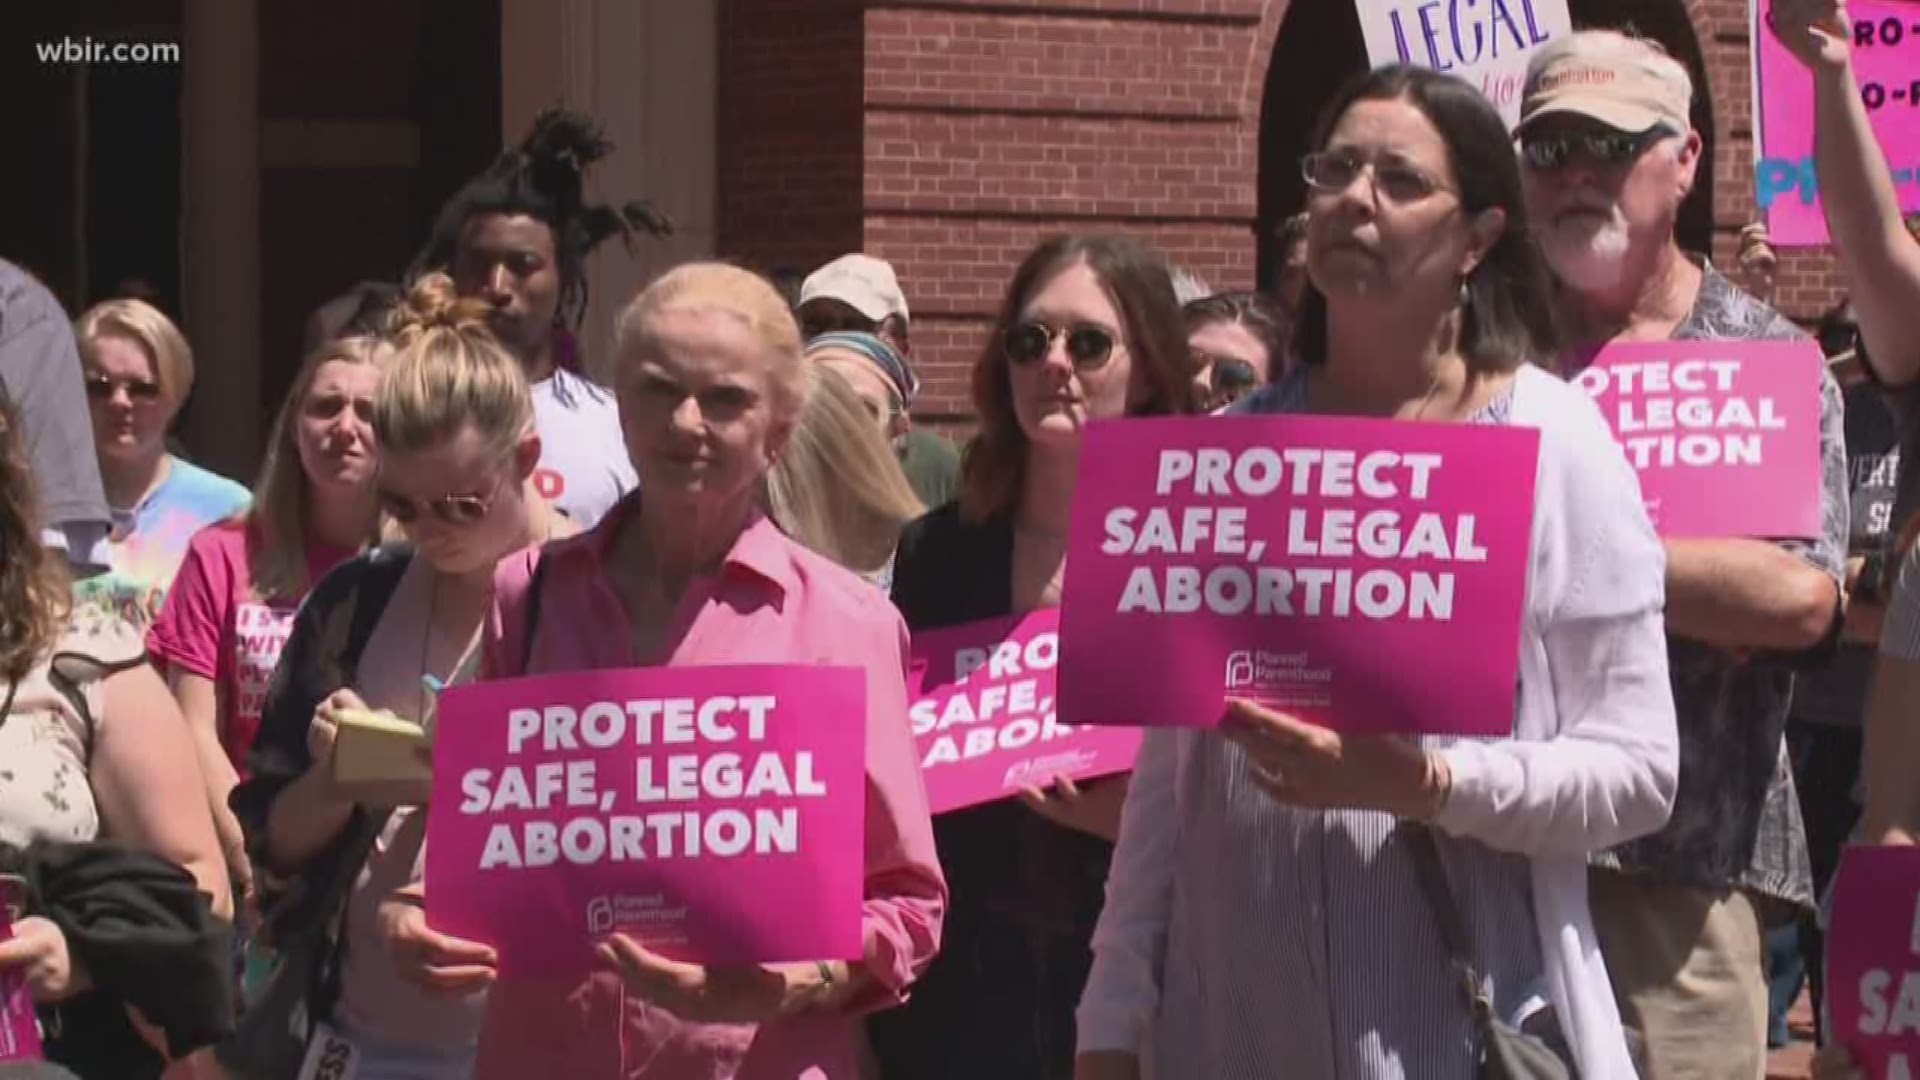 State lawmakers are renewing the abortion debate across the county. Plus, patients are being diverted from the only hospital in Fentress County. These headlines and more aired on 10News at 6 on Wednesday, May 22, 2019.